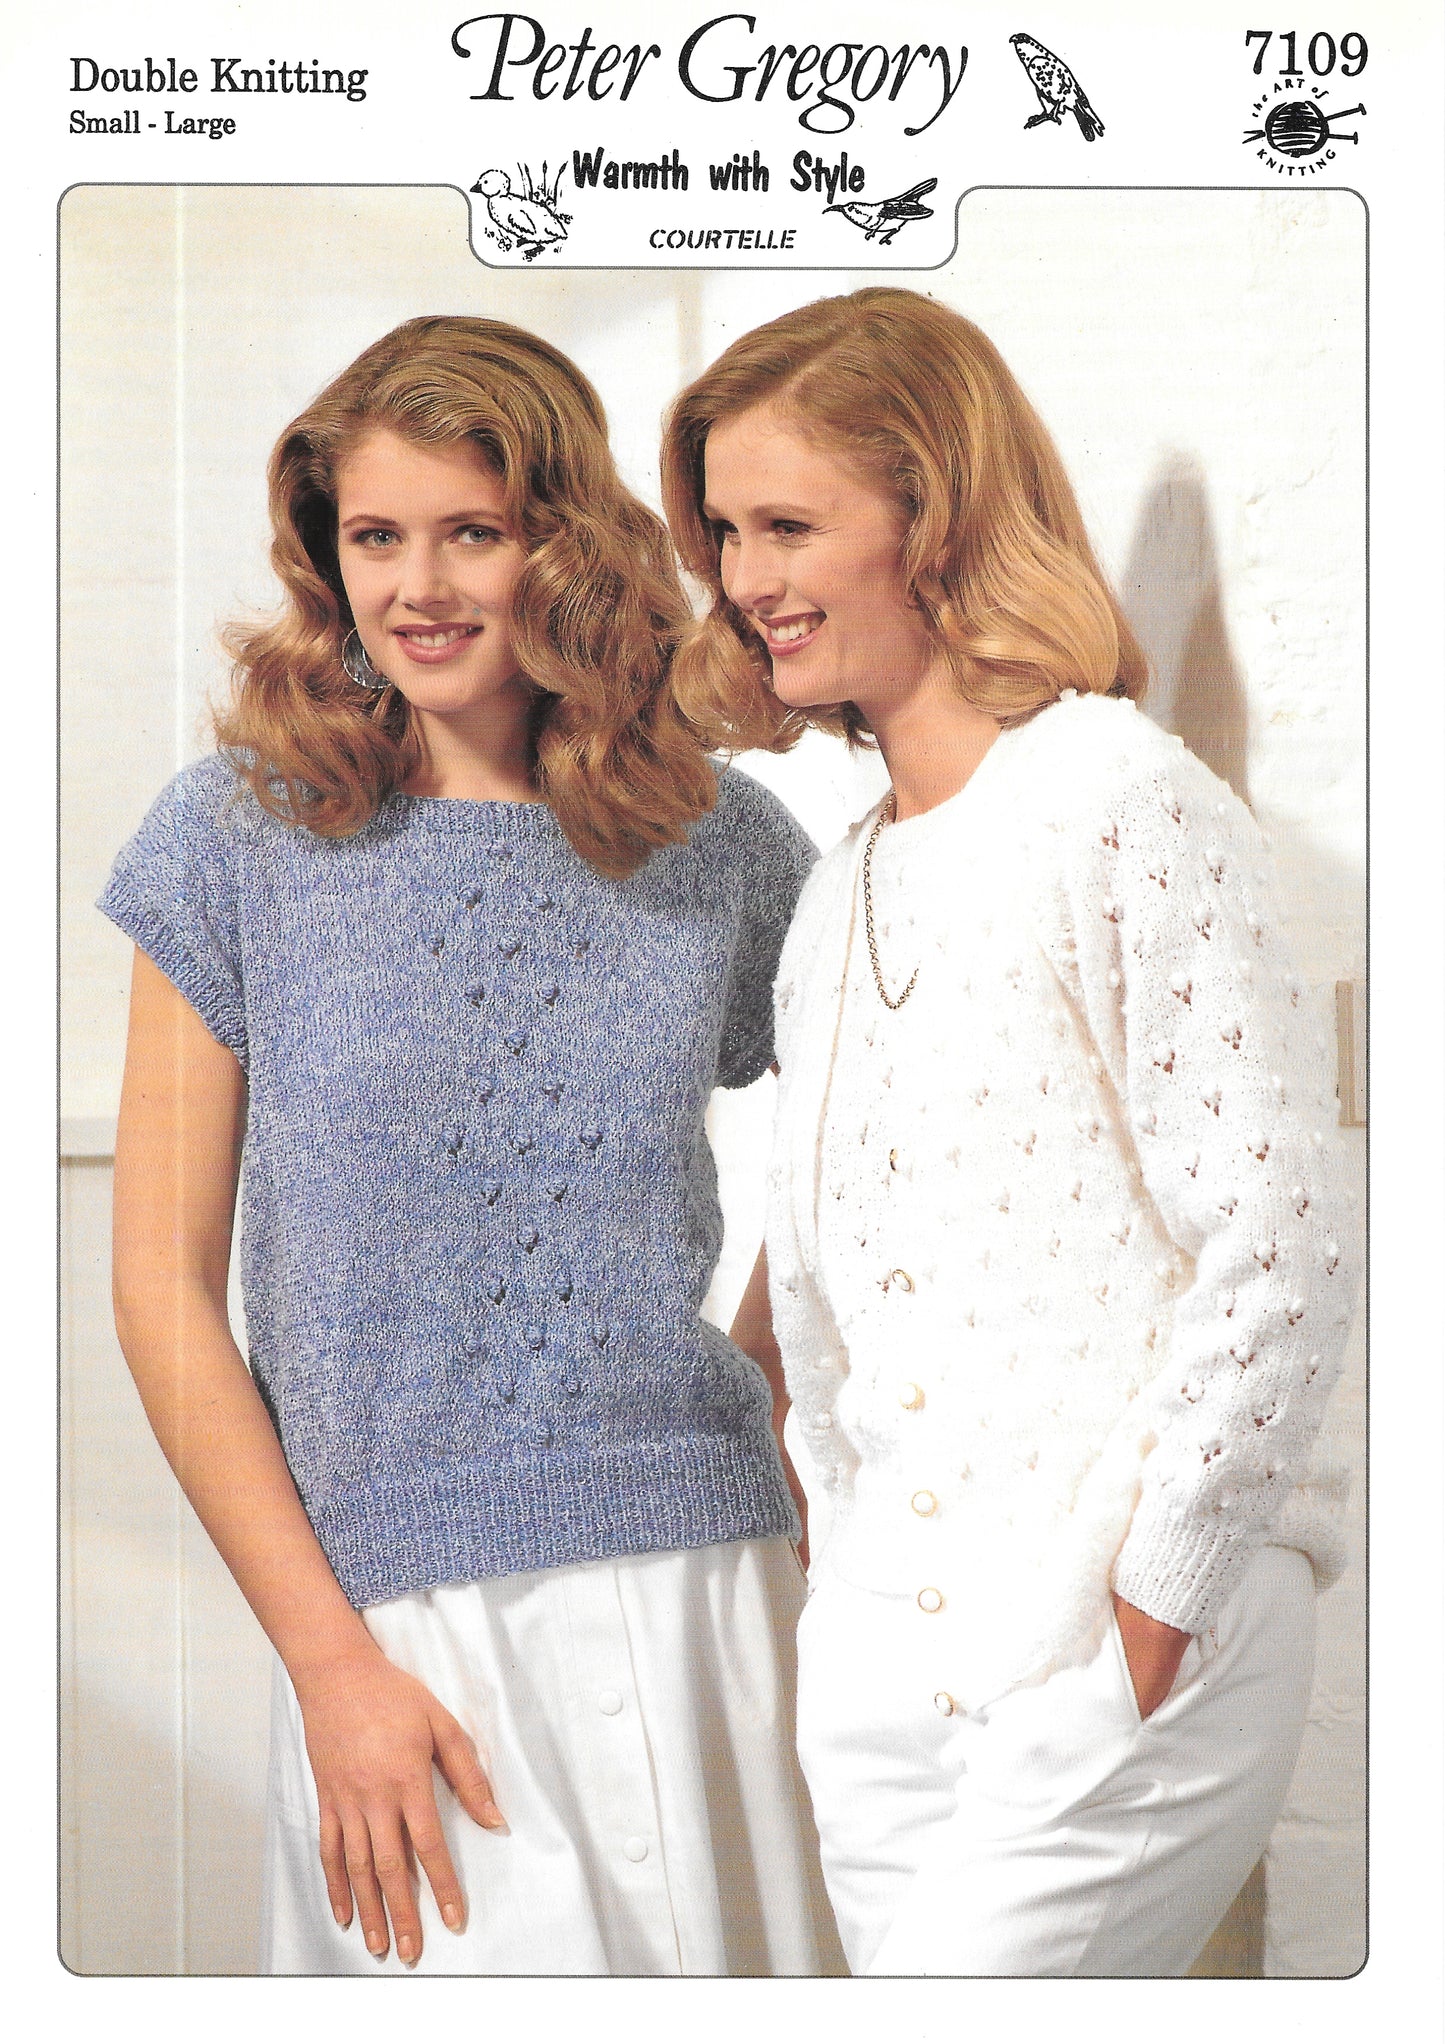 7109 PRELOVED Peter Gregory Knitting Pattern. Lady's Cardigan/Sweater. DK